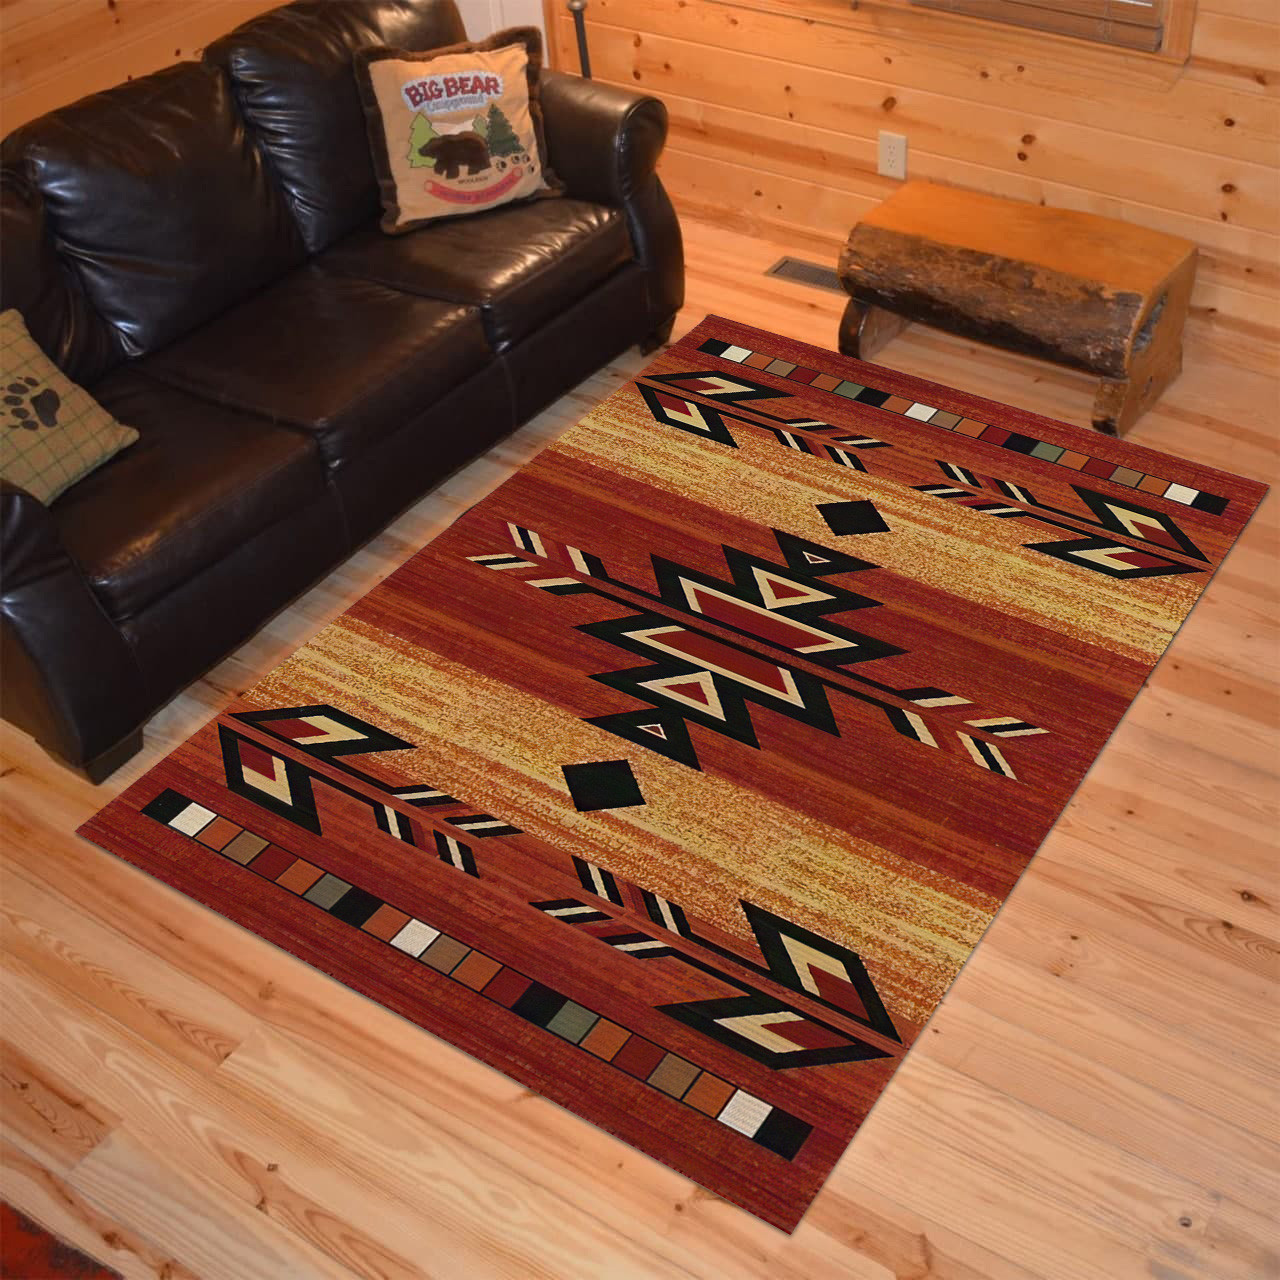 Rugs in Living Room and Bedroom - Southwestern apache lodge claret black rug southwest area rug native american style home decor carpet